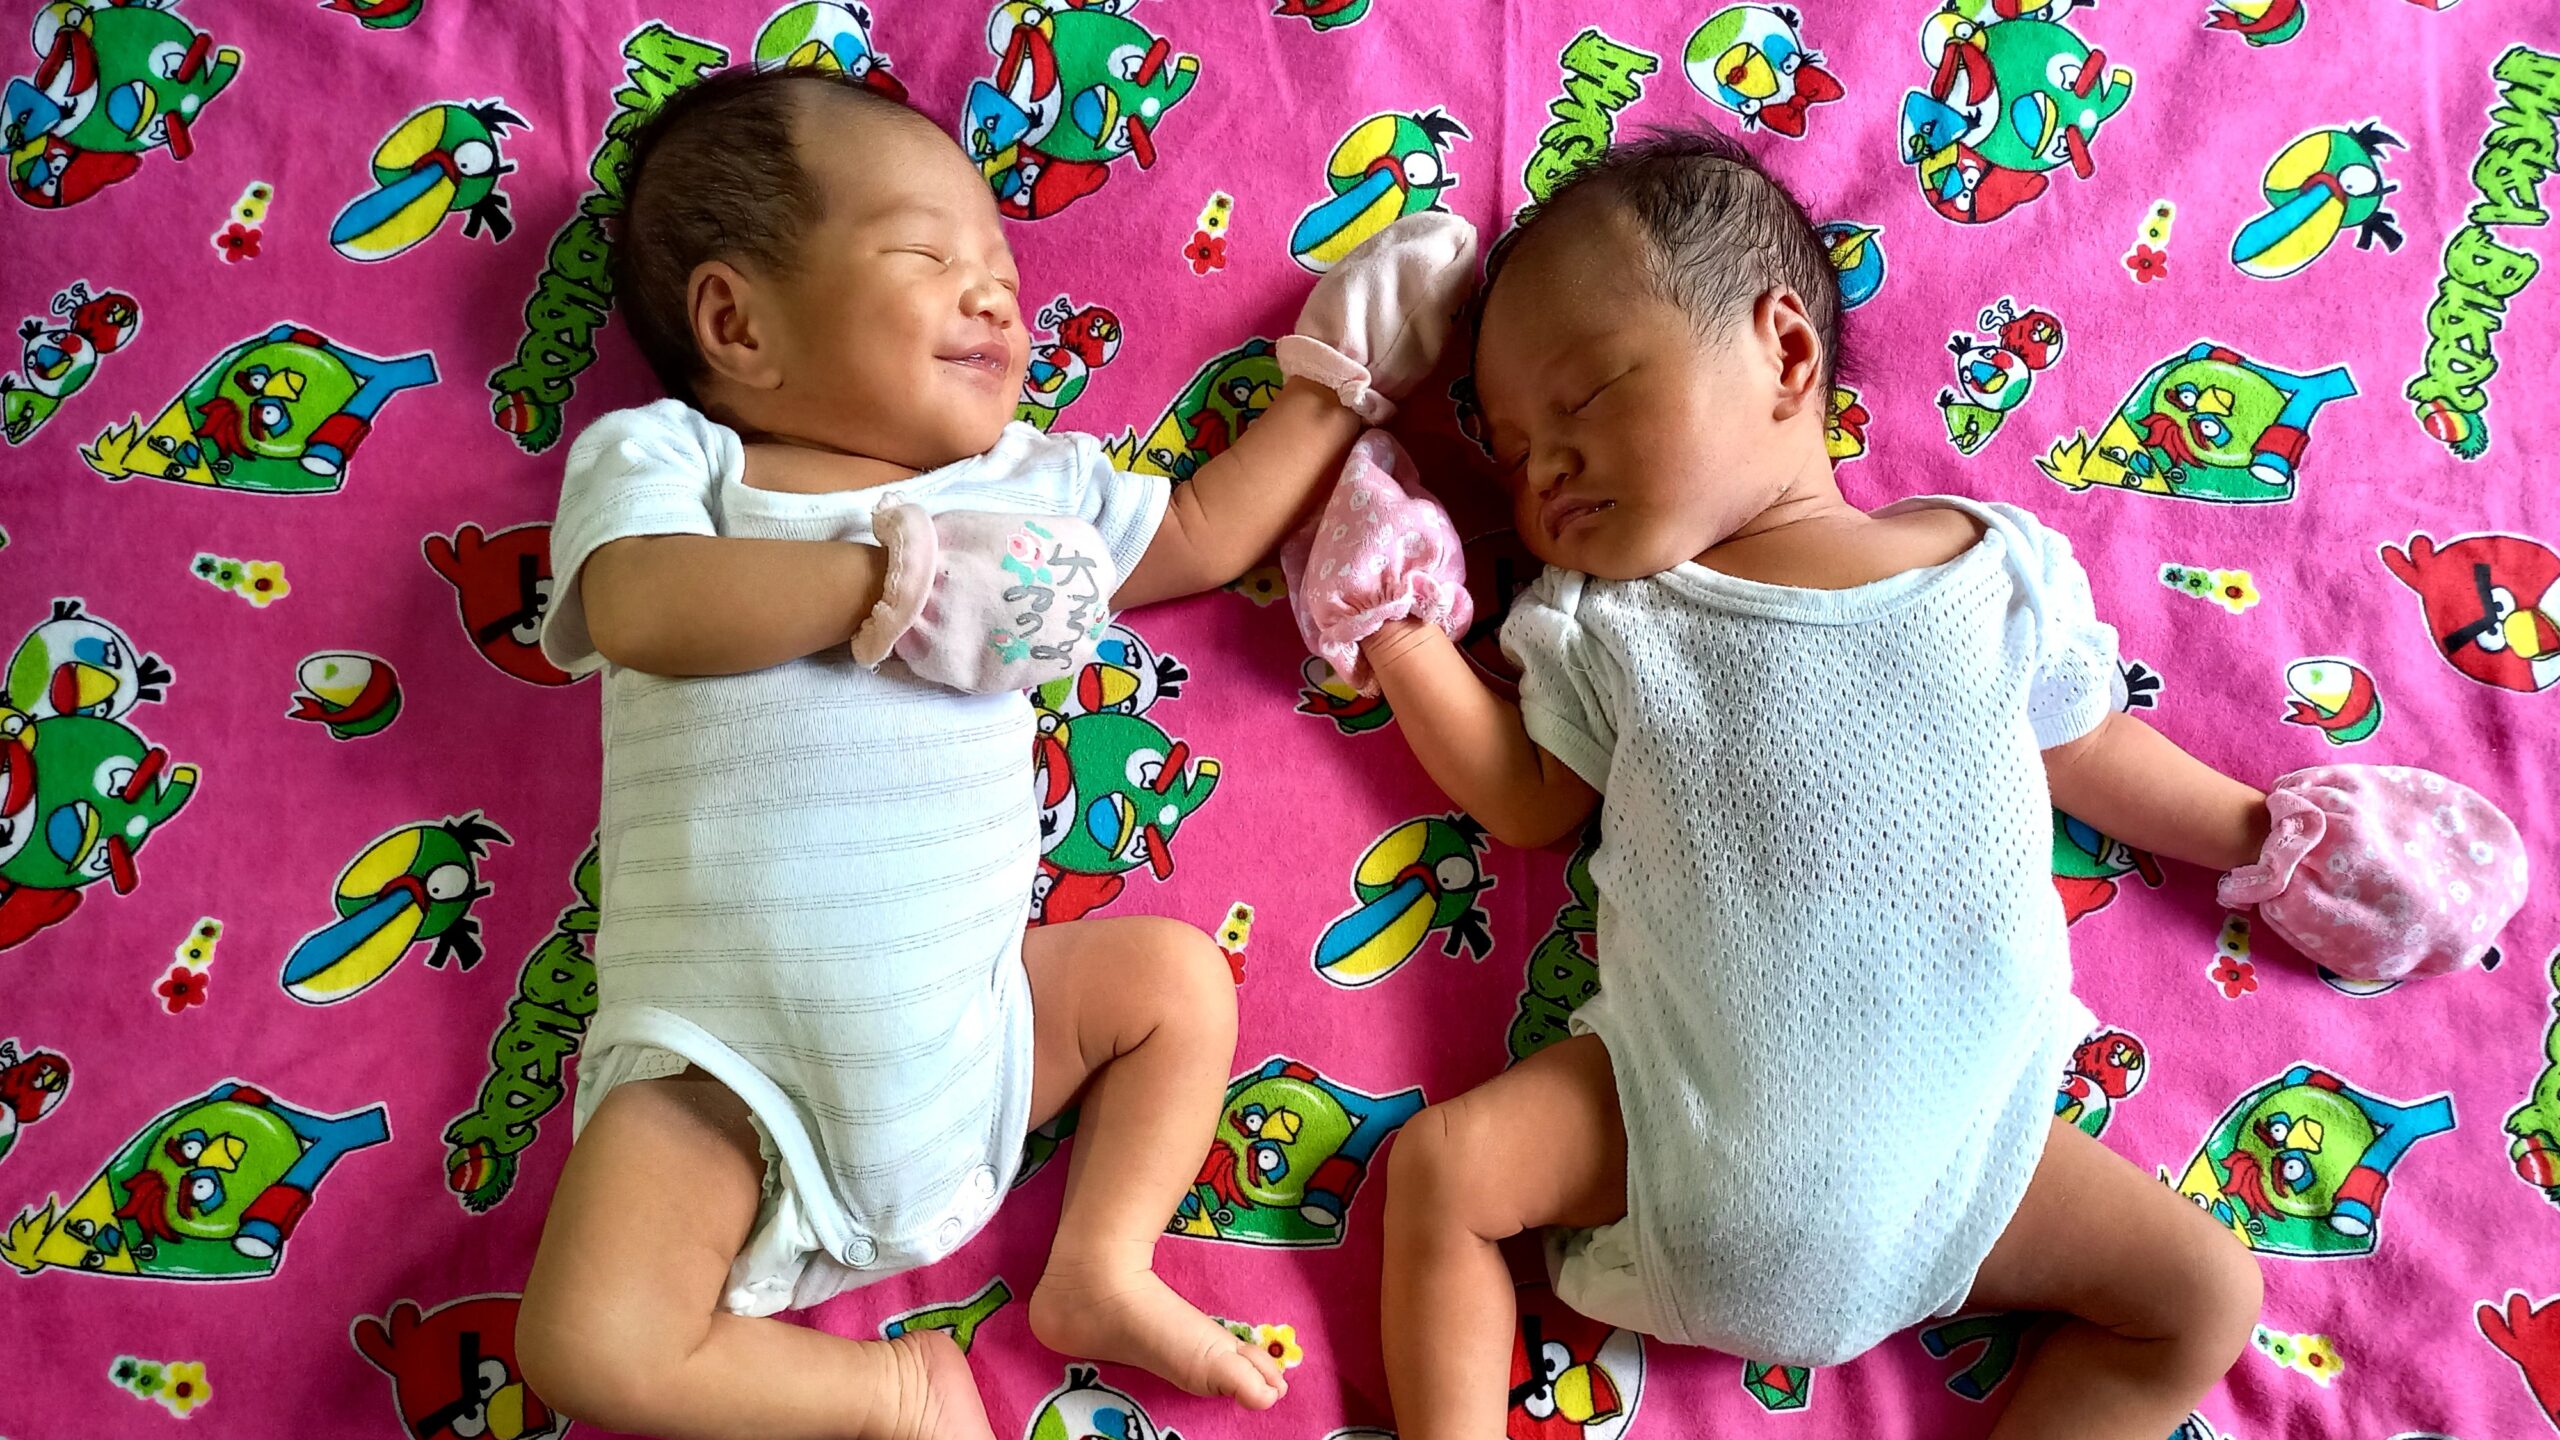 Mangaia’s first twins born in 20 years